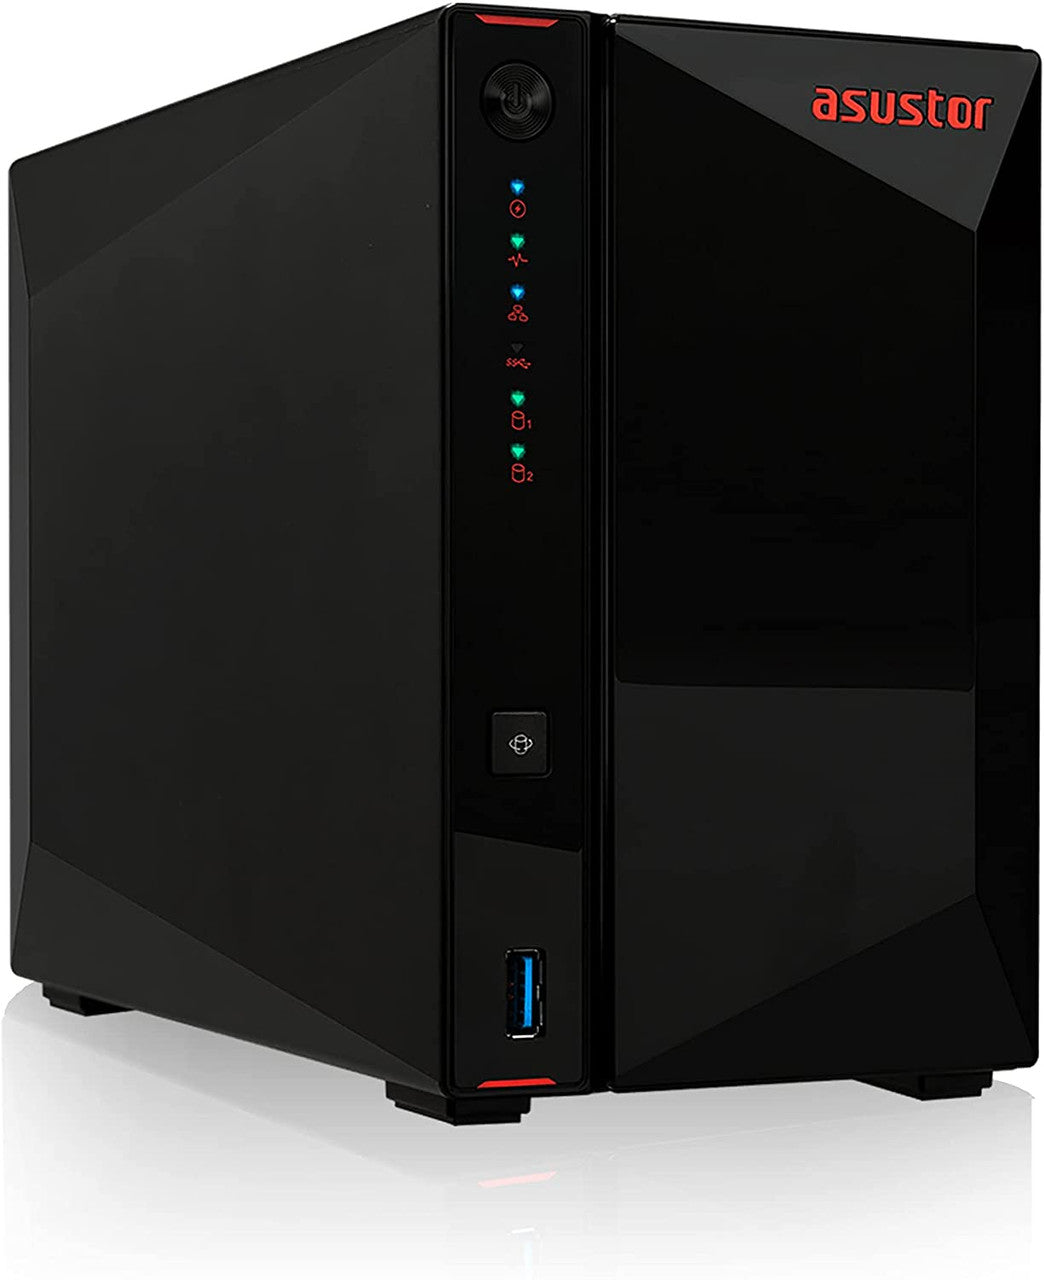 Asustor AS5202T 2-Bay Nimbustor 2 NAS with 2GB RAM and 20TB (2 x 10TB) Western Digital RED Plus Drives Fully Assembled and Tested